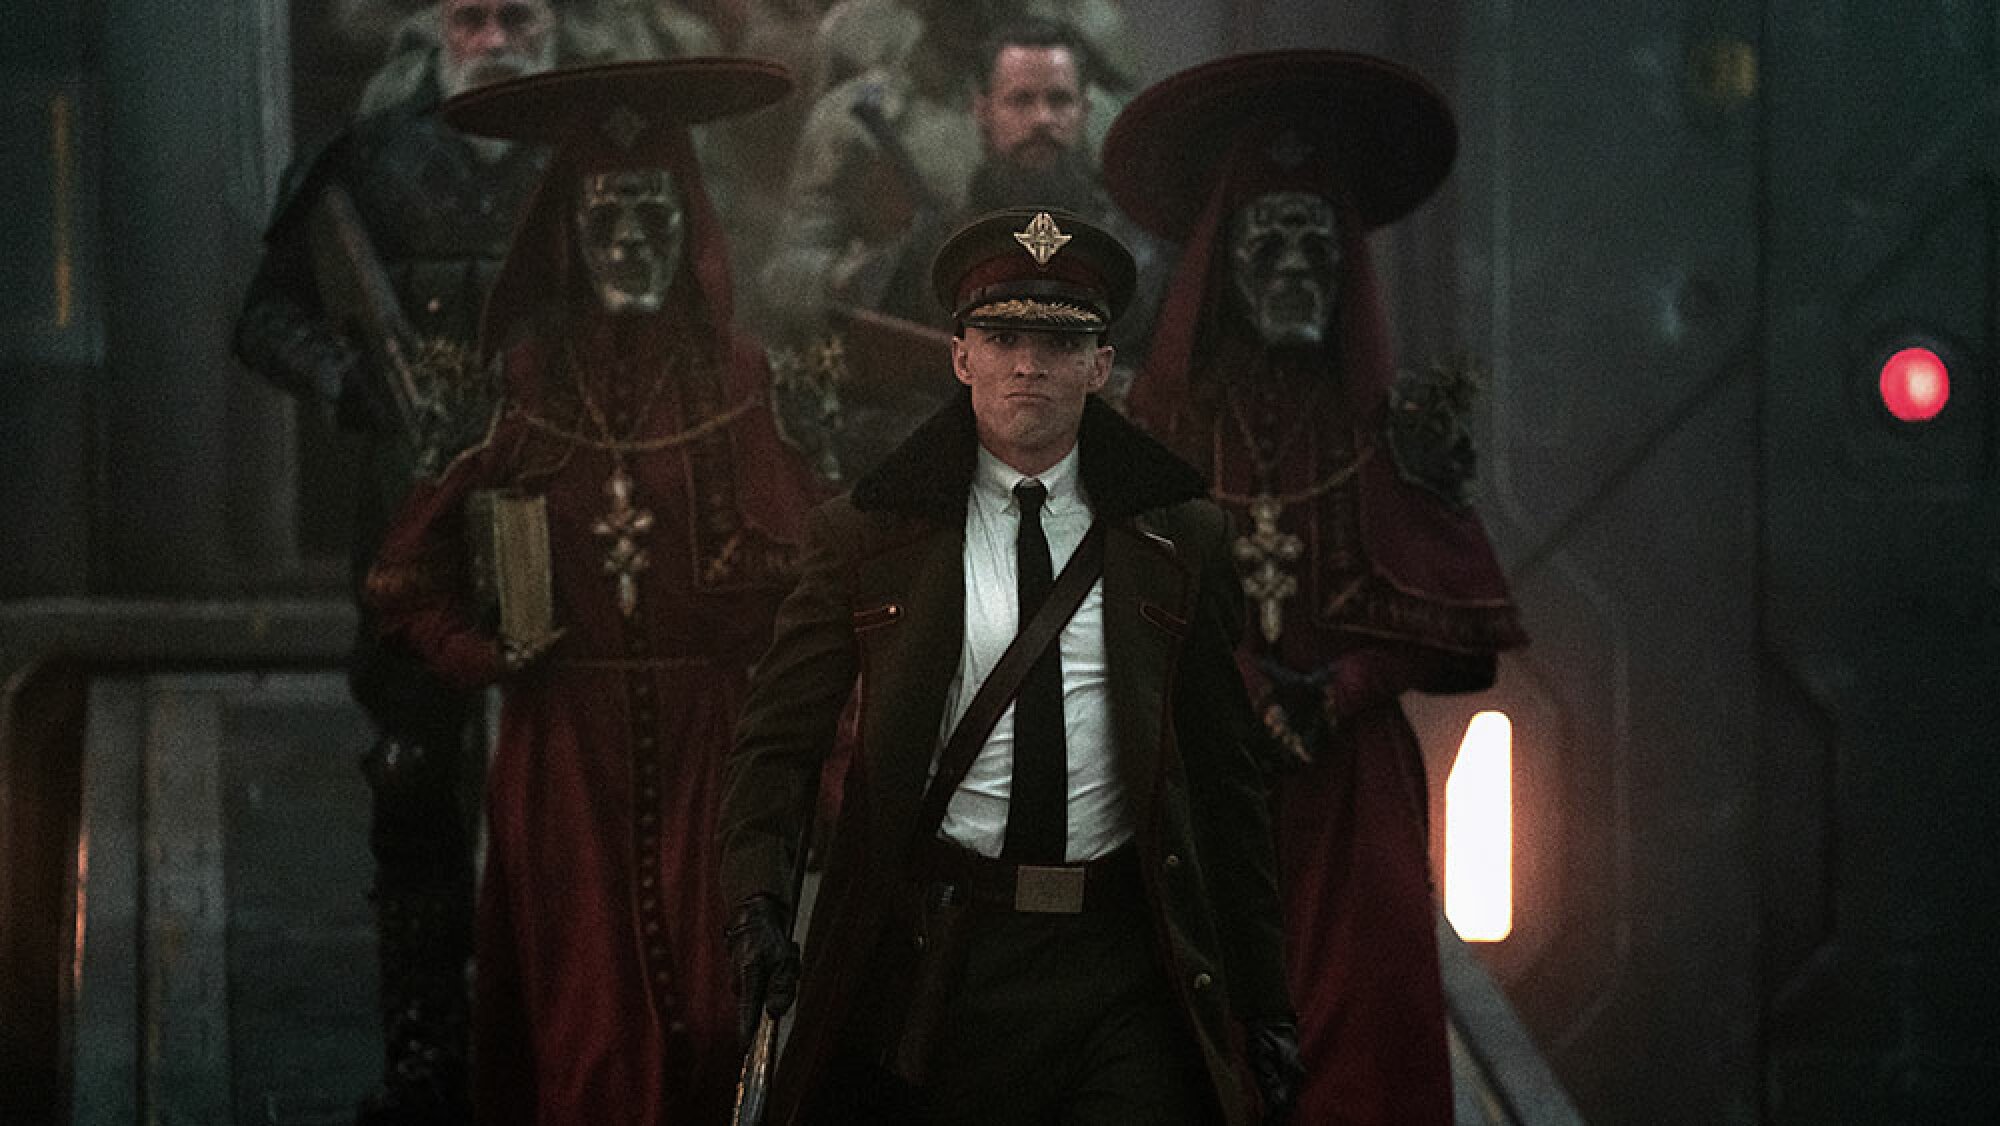 An armed man in uniform is followed by two lines of people, including a pair wearing red robes and face masks.